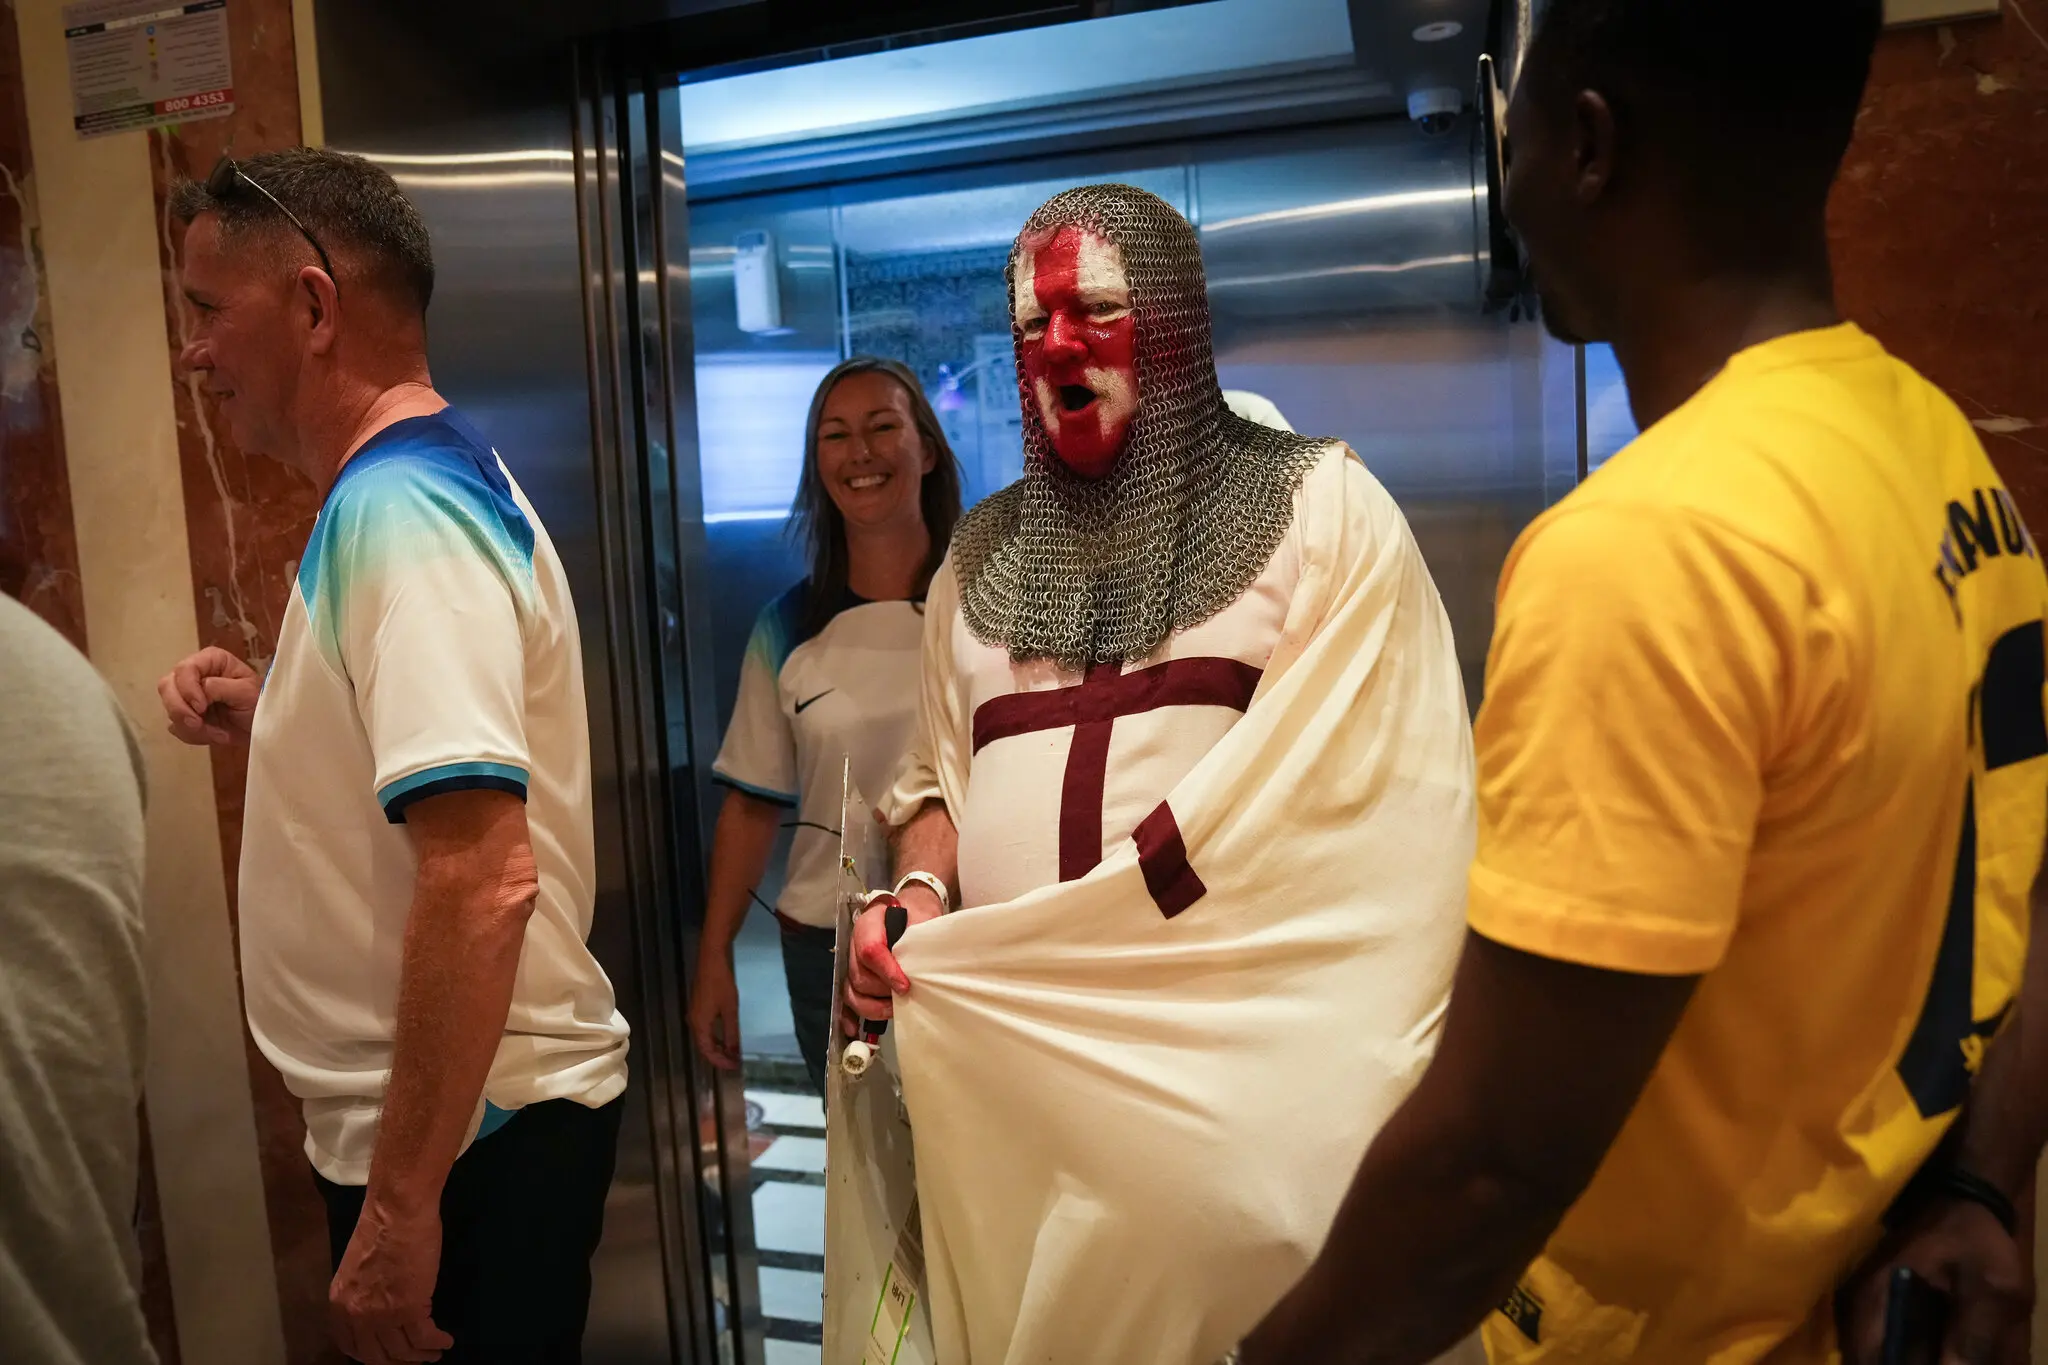 Dressed as Saint George, the patron saint of England, Paul Farrell leaves the Red Lion pub